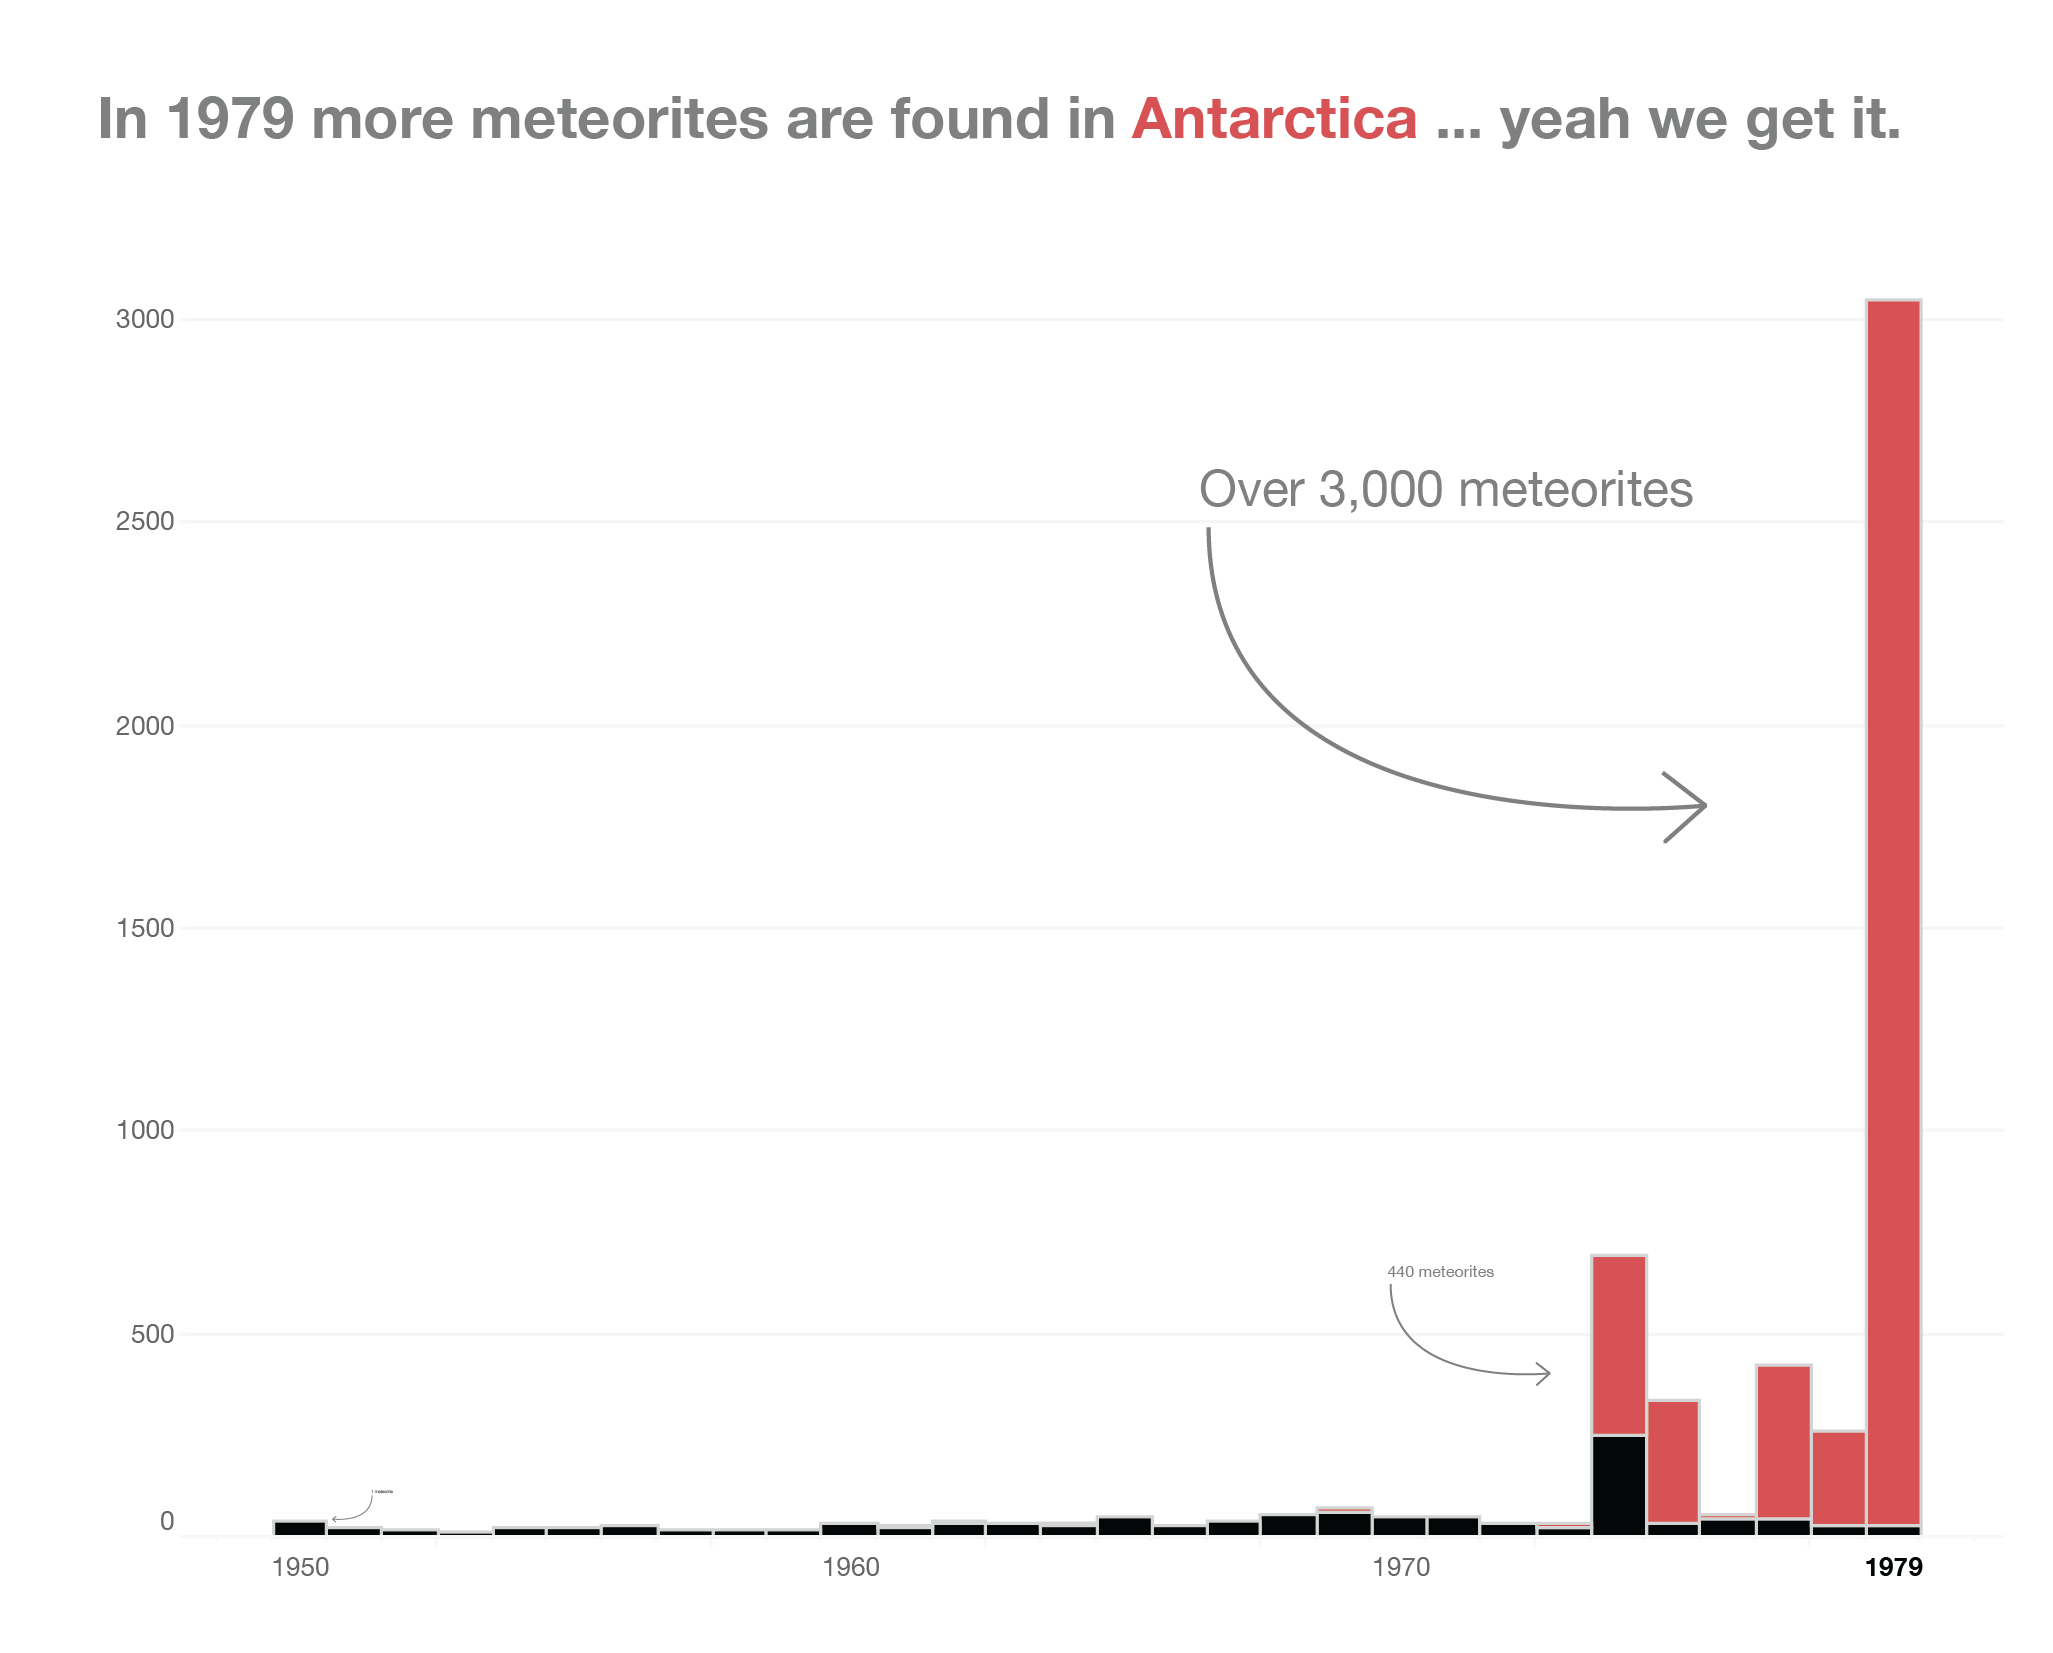 How Antarctica became the best place to find meteorites